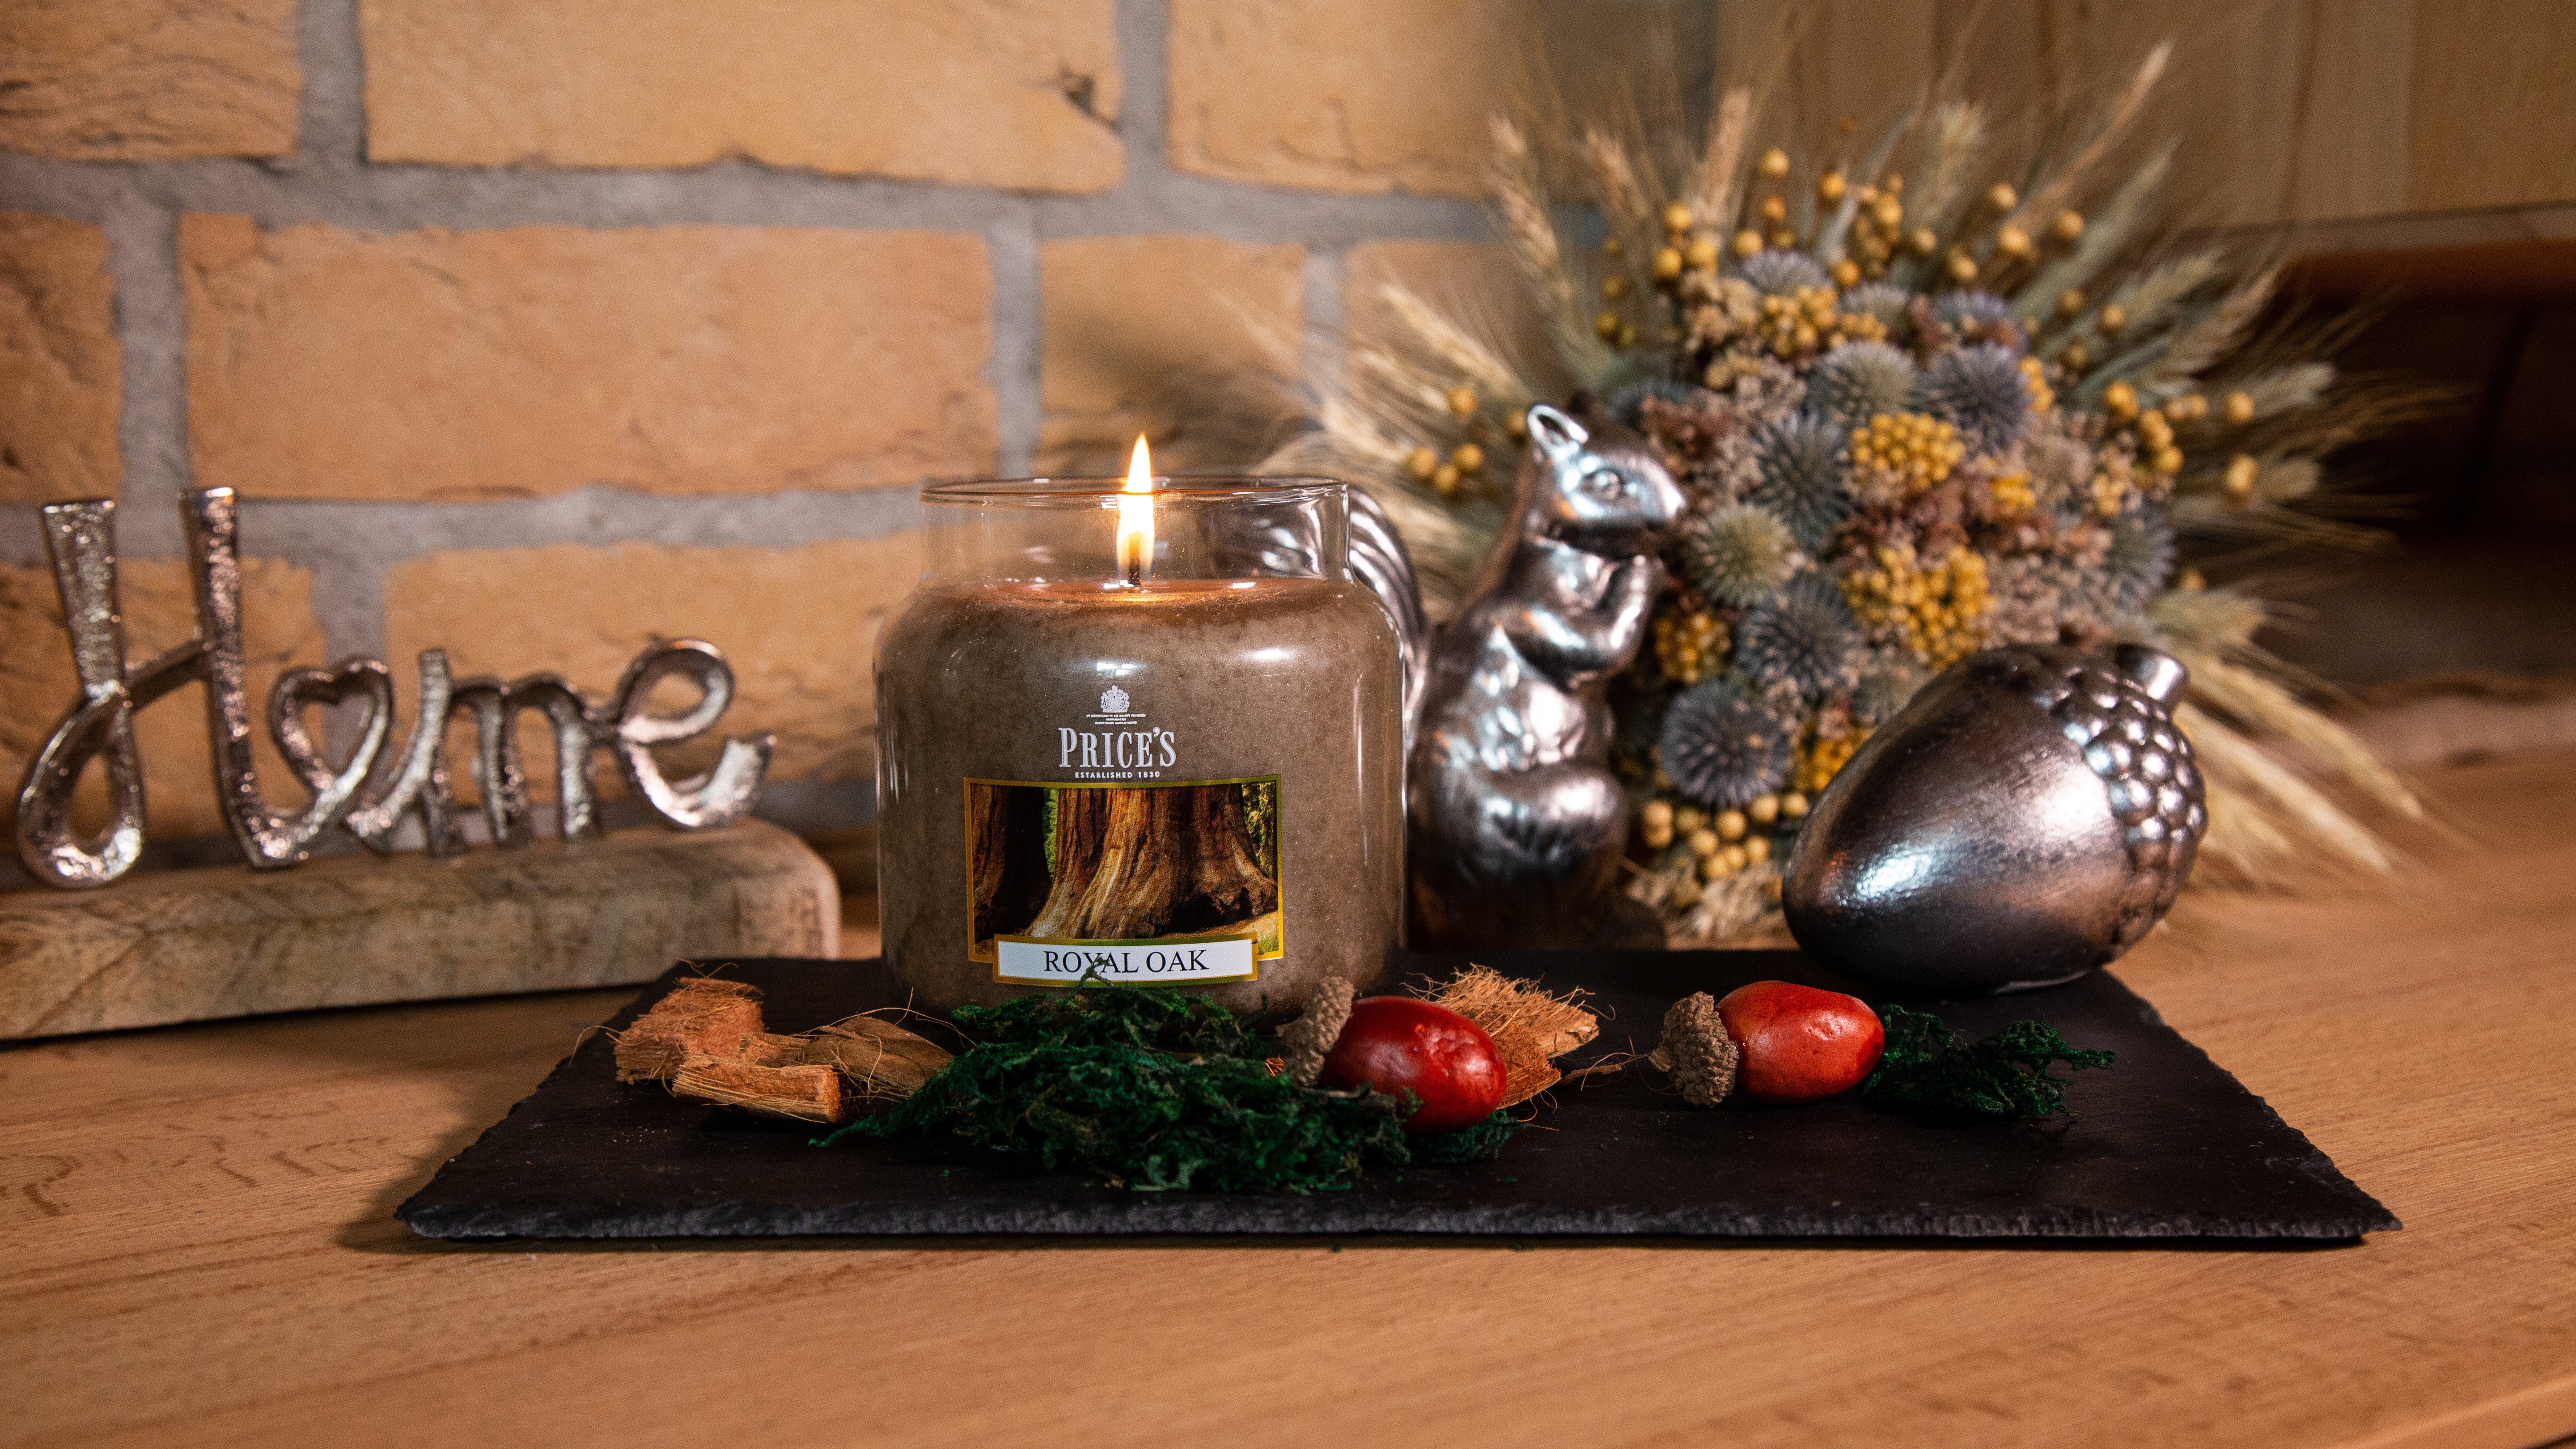 Prices Candle "Royal Oak" 411g  